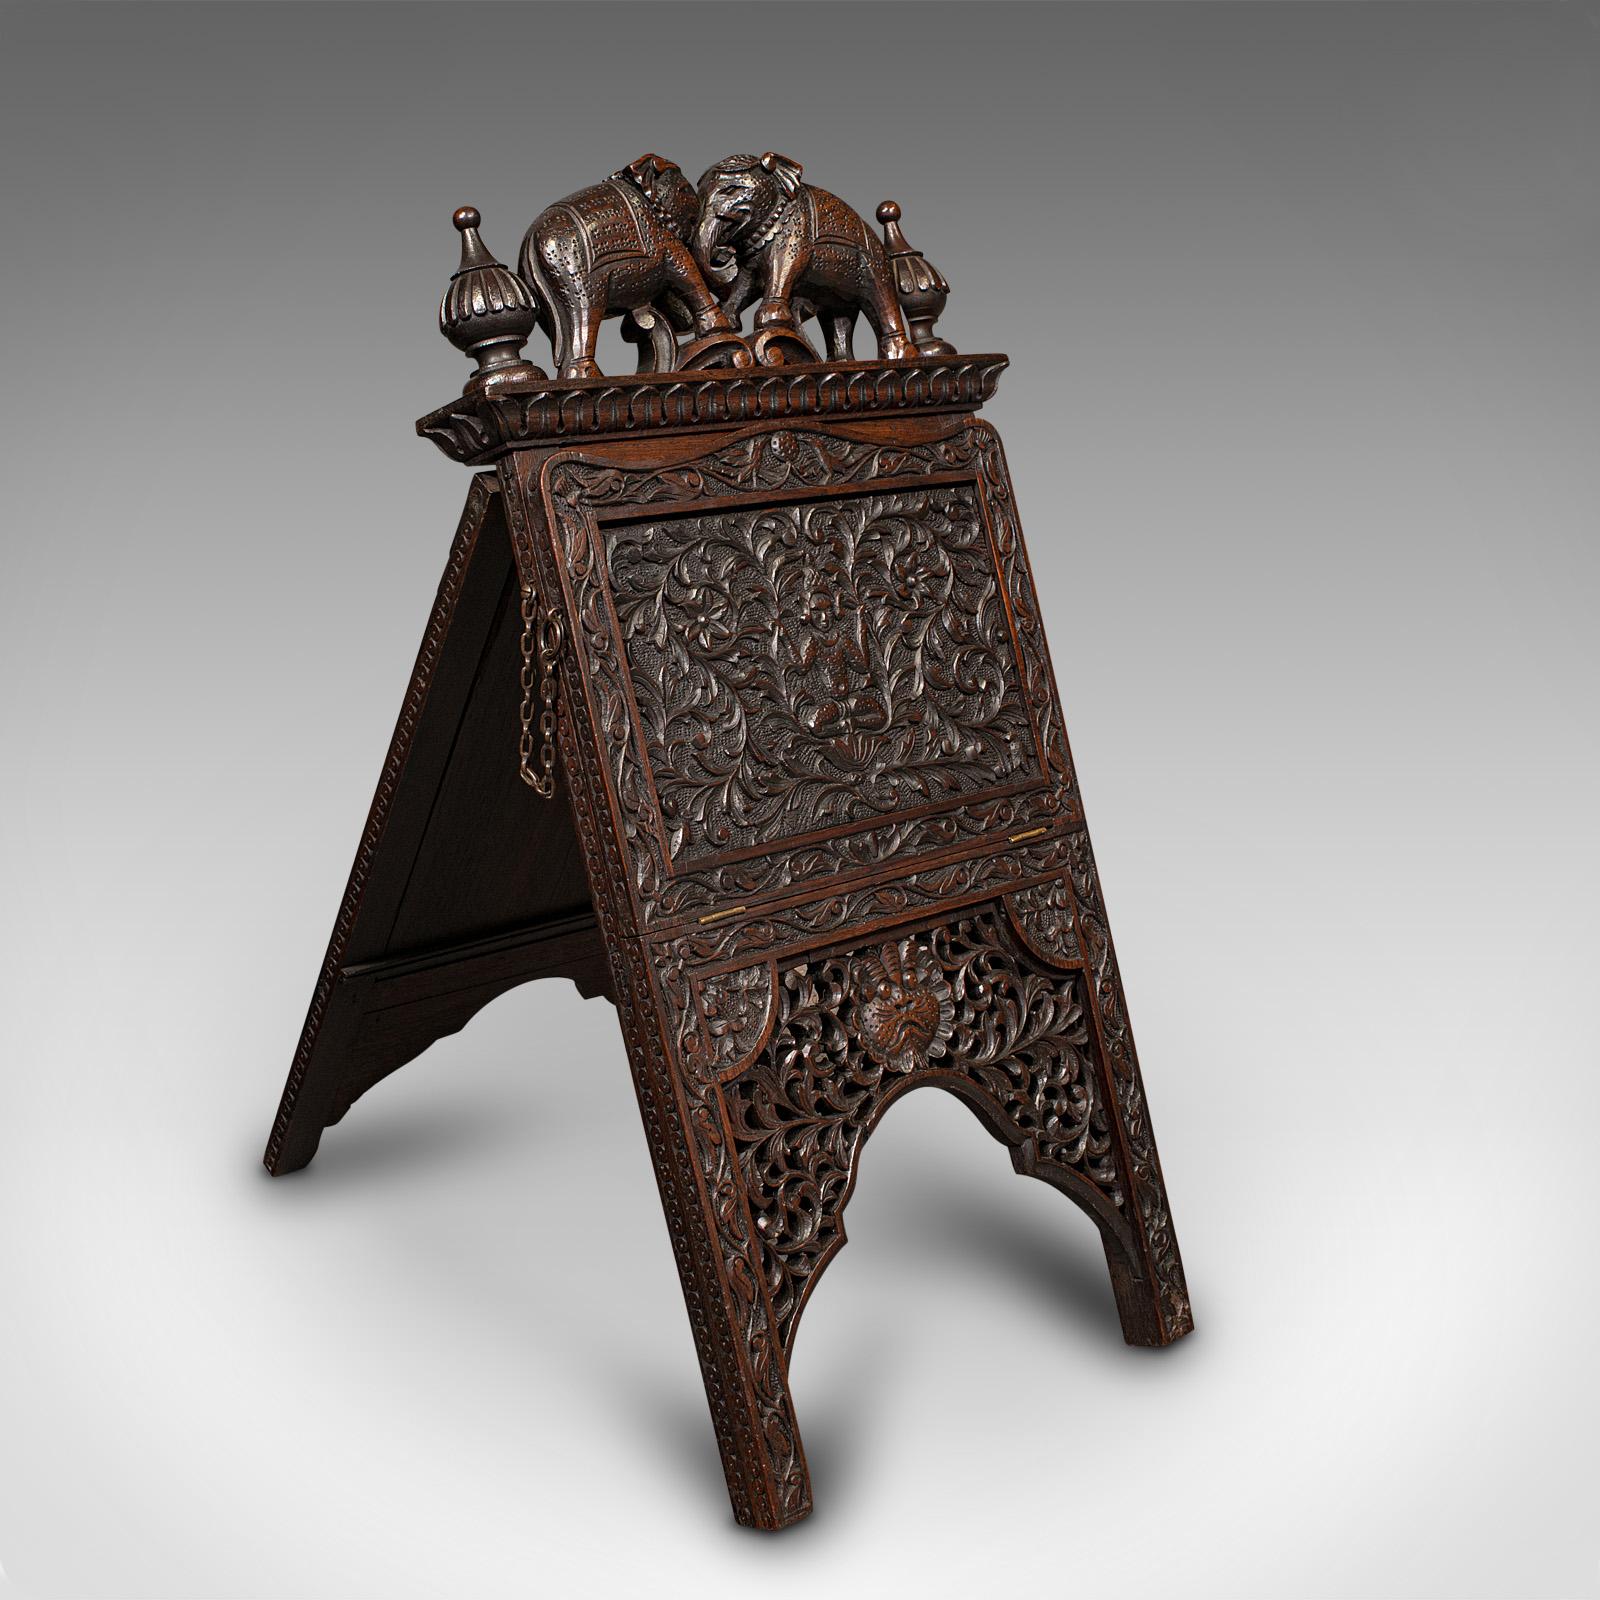 This is an antique carved folio stand. A Burmese, mahogany folding gentleman's newspaper rack, dating to the early Victorian period, circa 1850.

Excellent craftsmanship with striking carved detail.
Displays a desirable aged patina and in superb